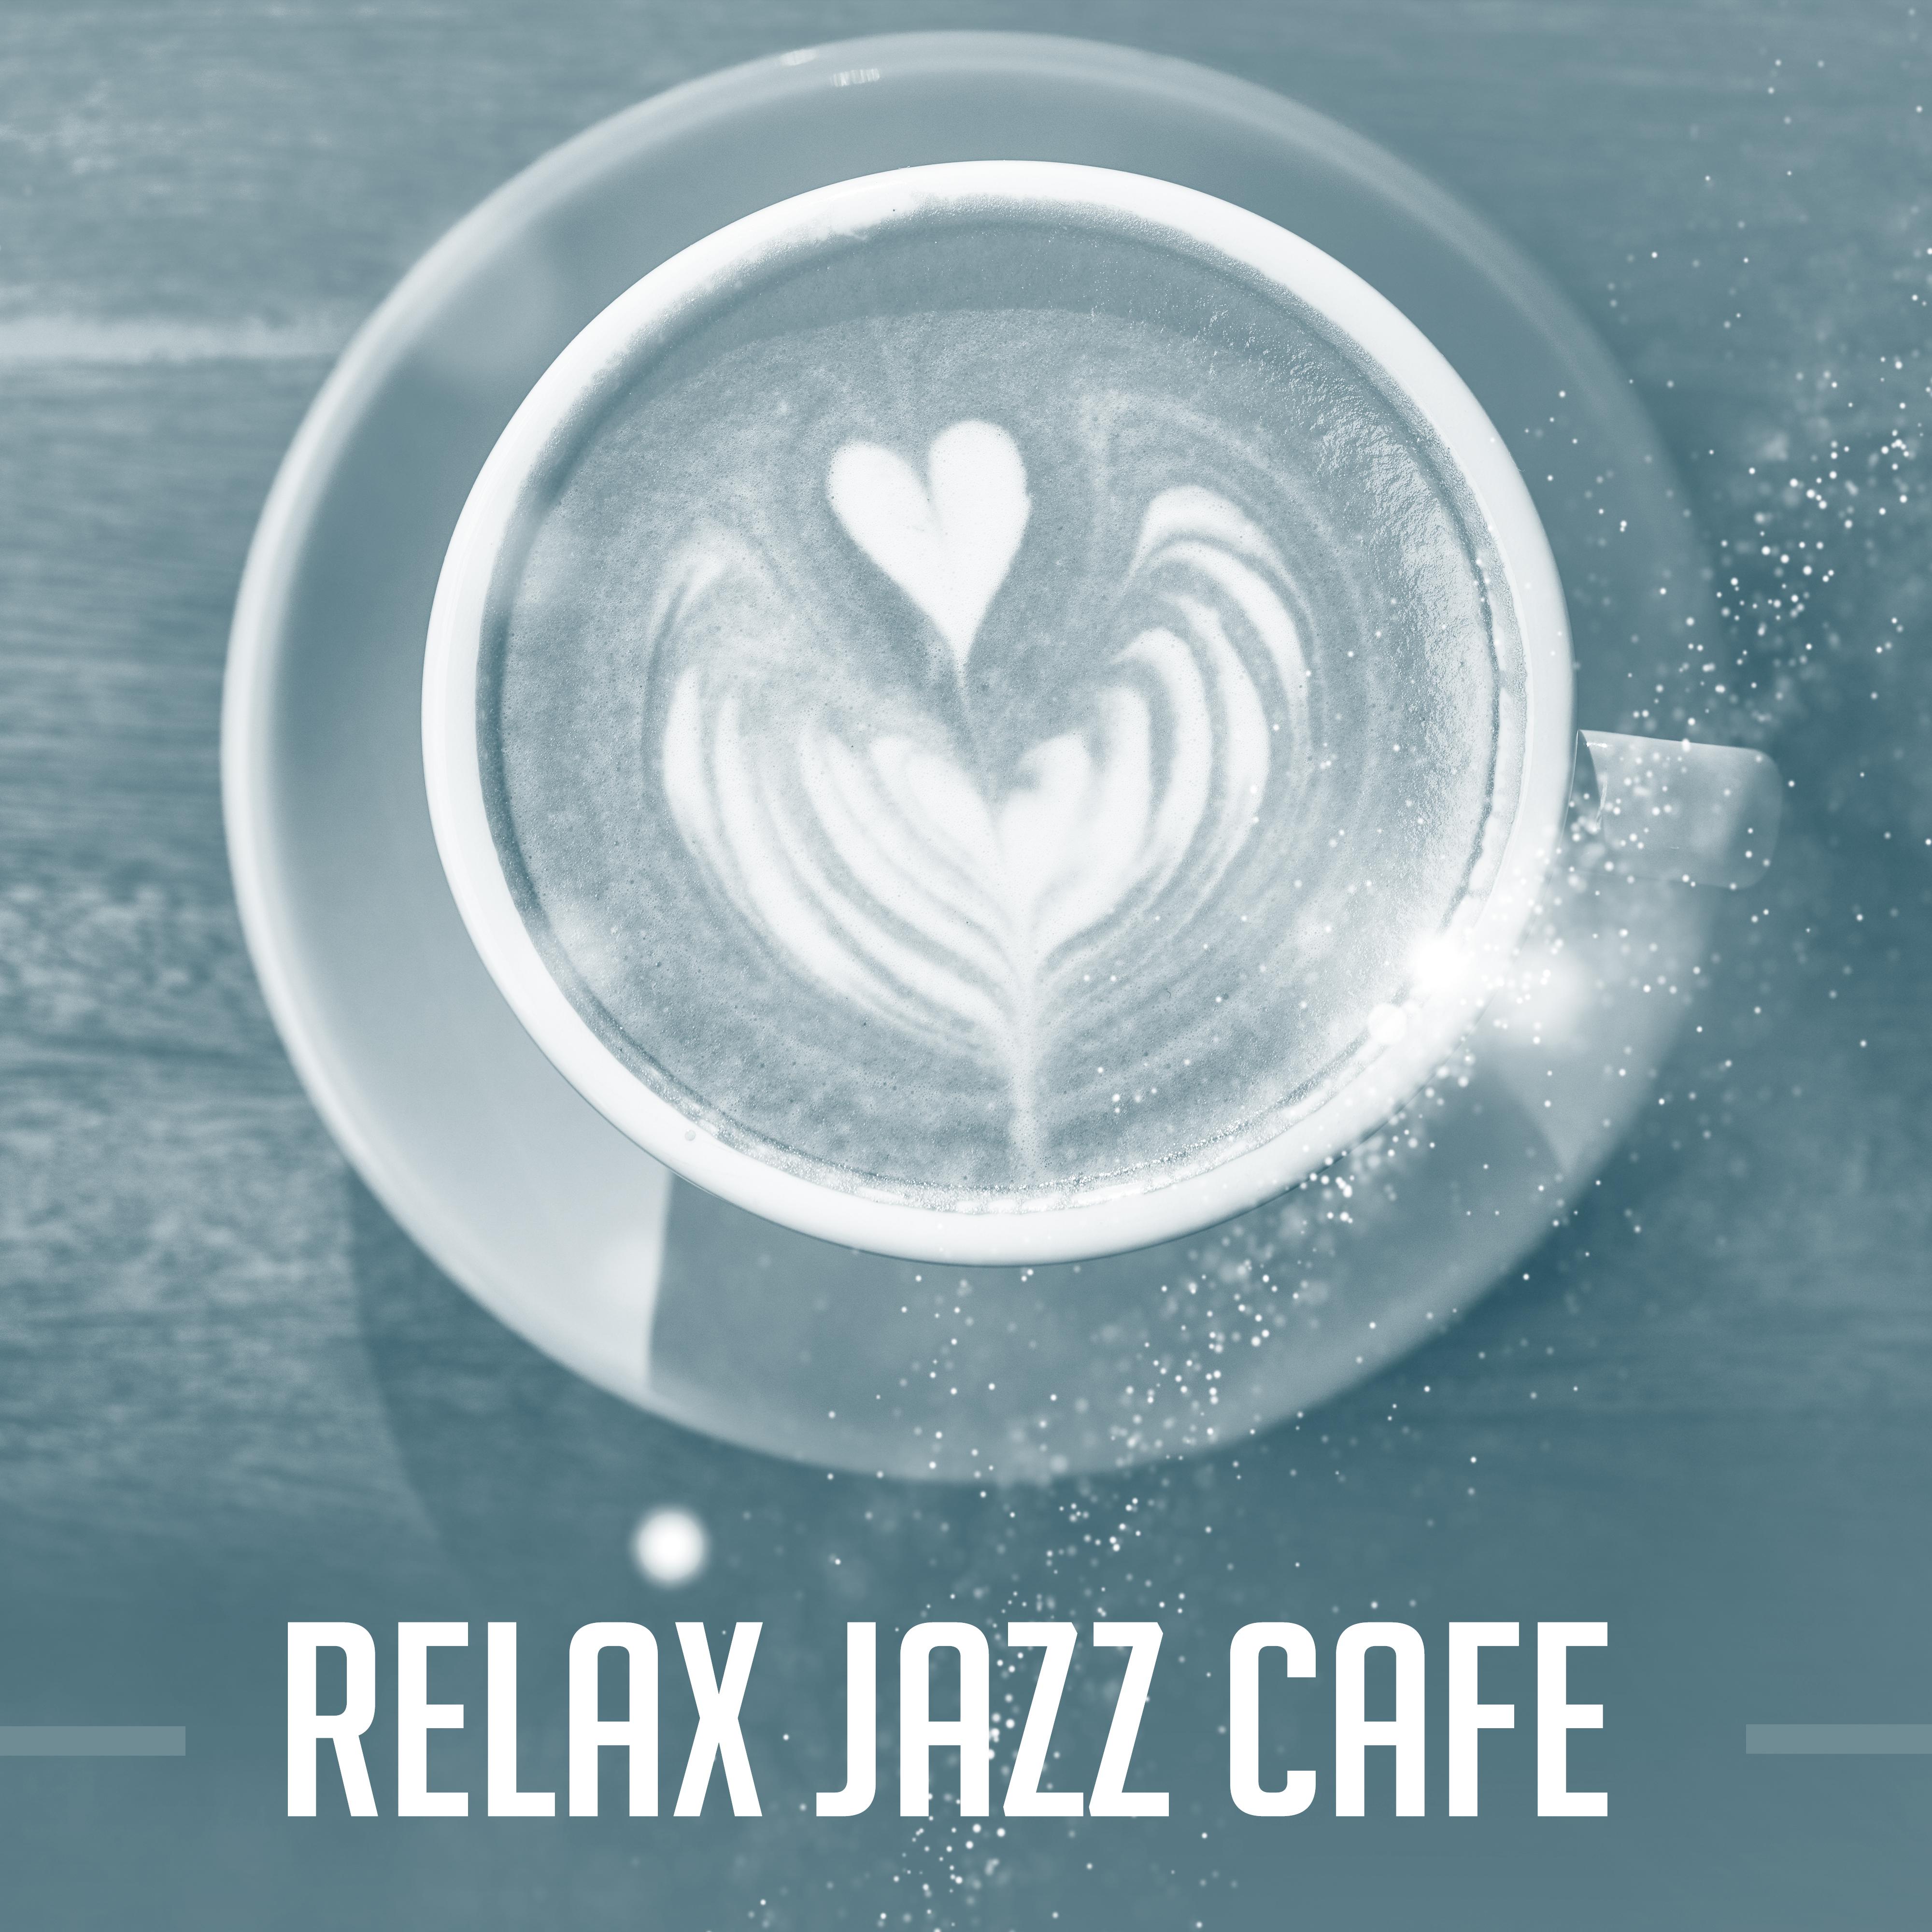 Relax Jazz Cafe  Instrumental Sounds to Rest, Pure Relaxation, Black Coffee, Cafe Talk, Dinner with Family, Restaurant Jazz